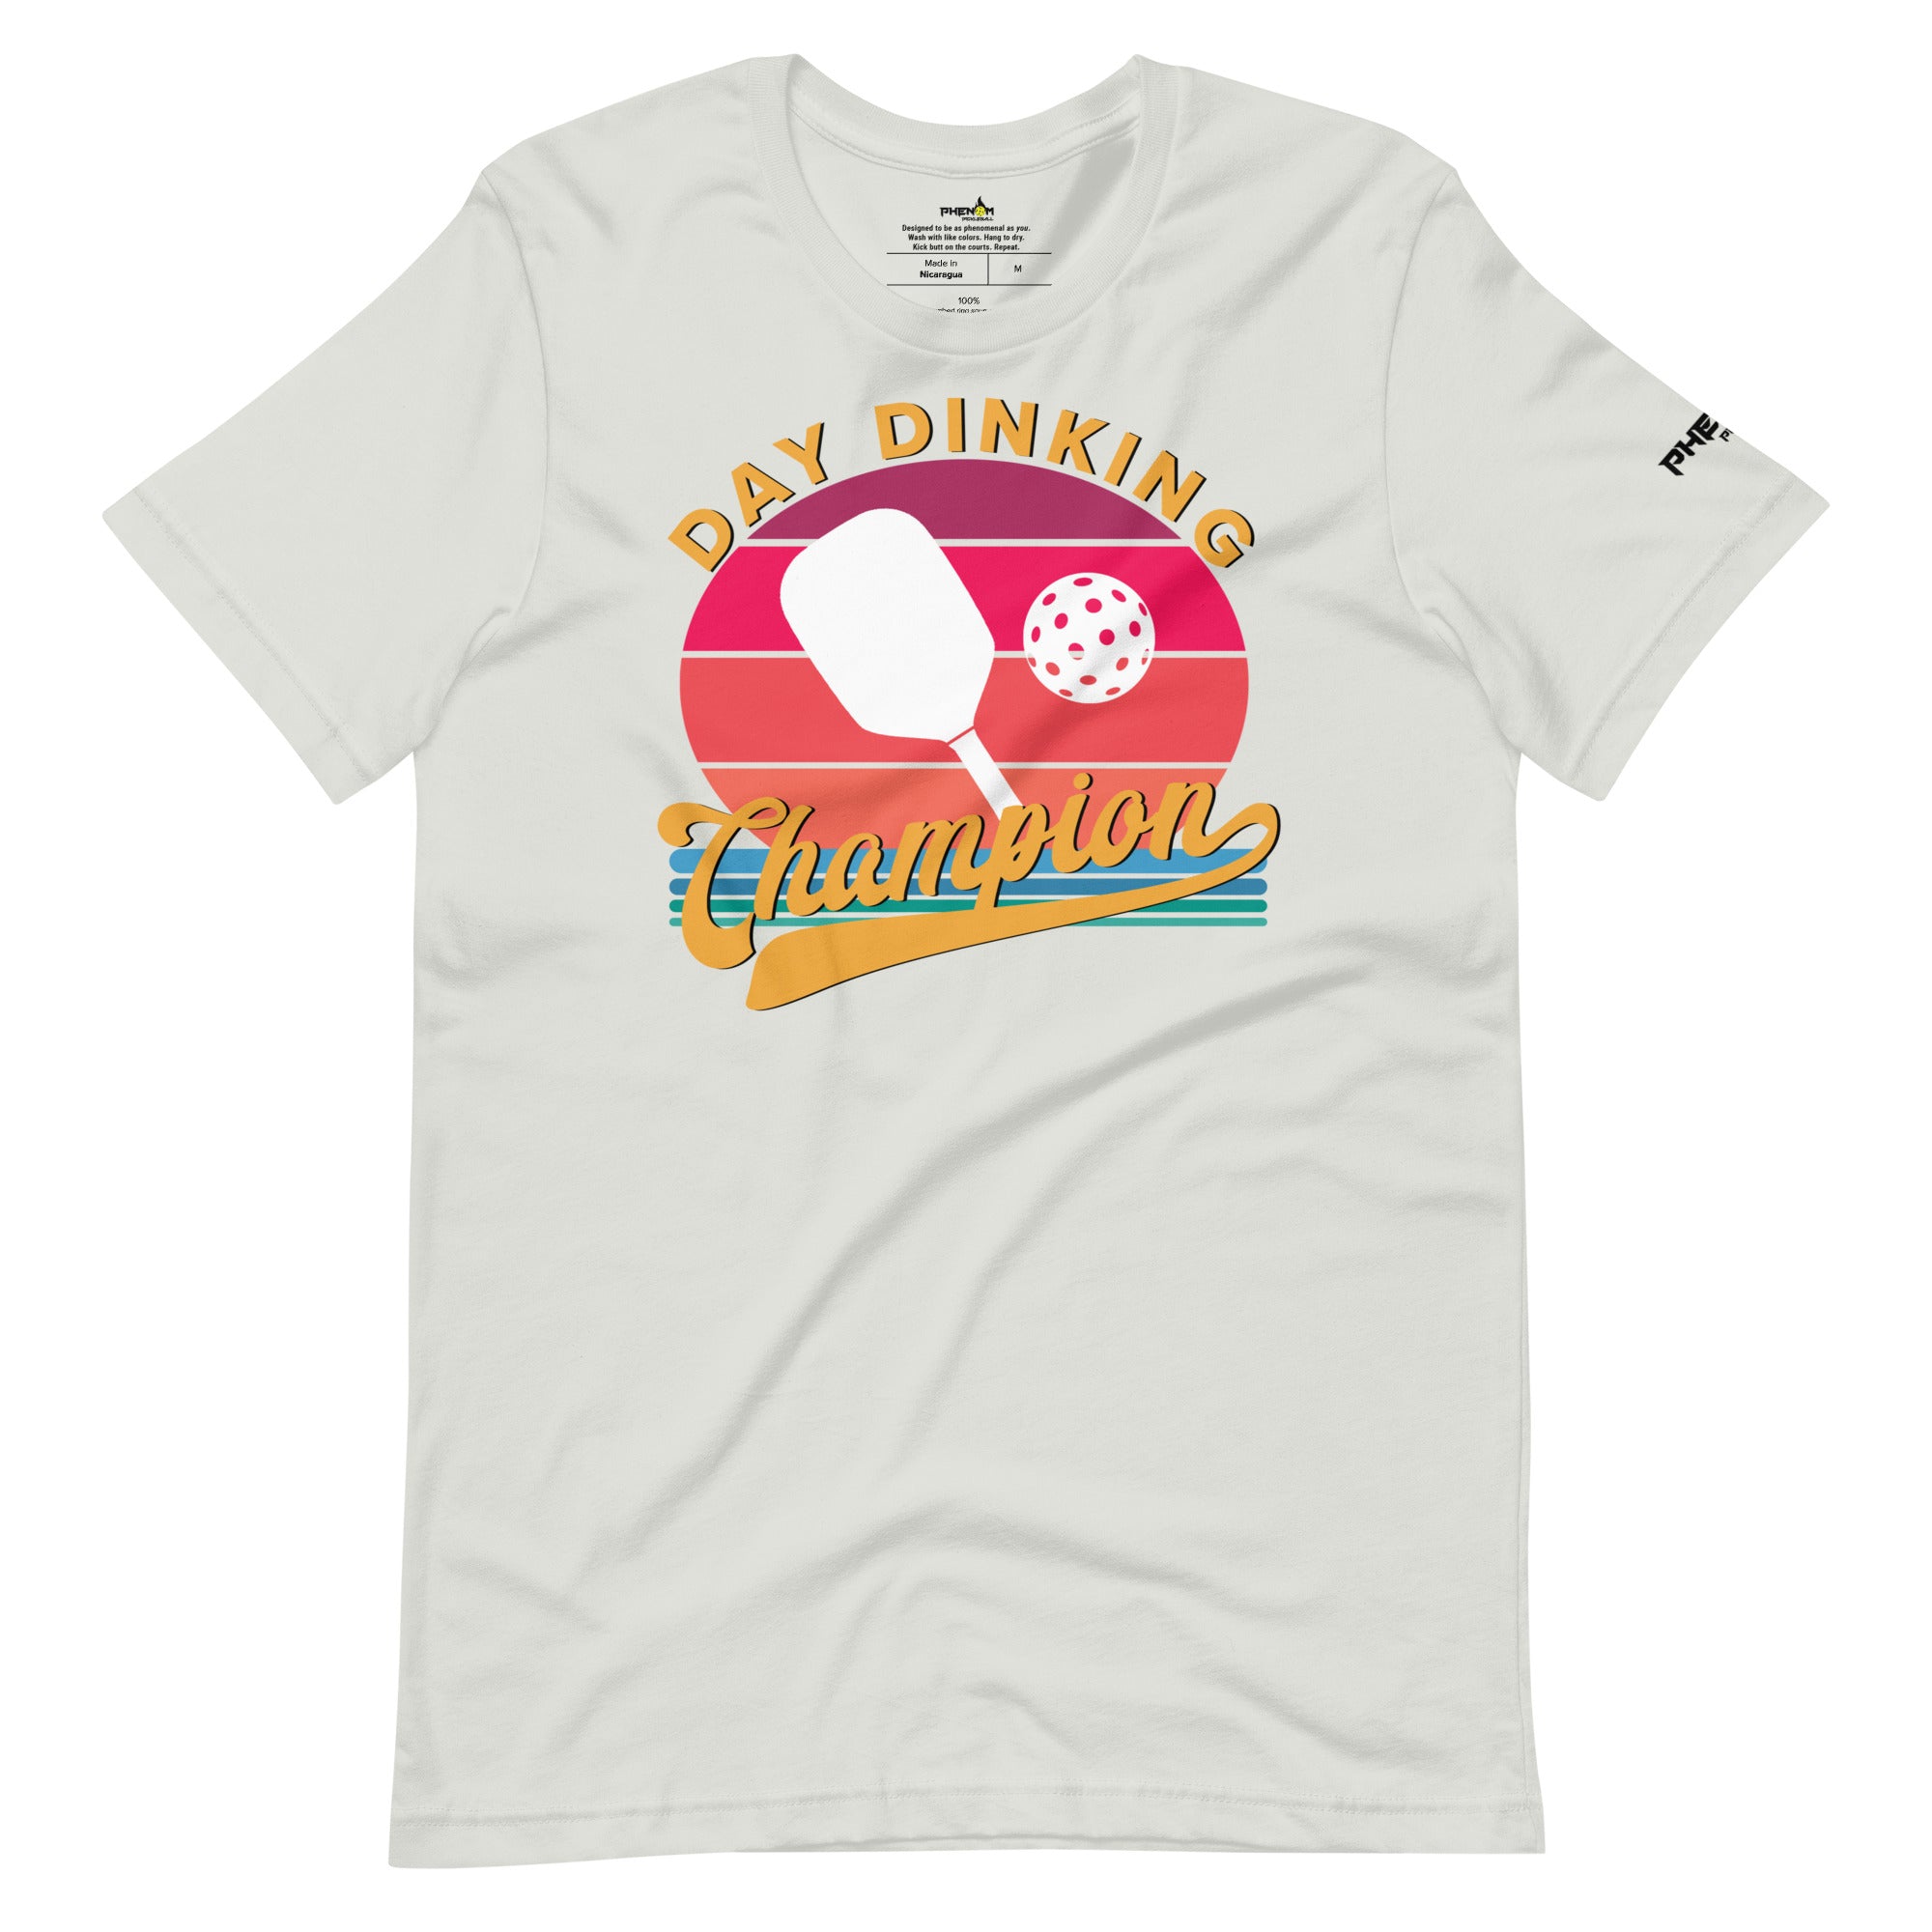 light gray day dinking champion retro inspired pickleball shirt apparel front view